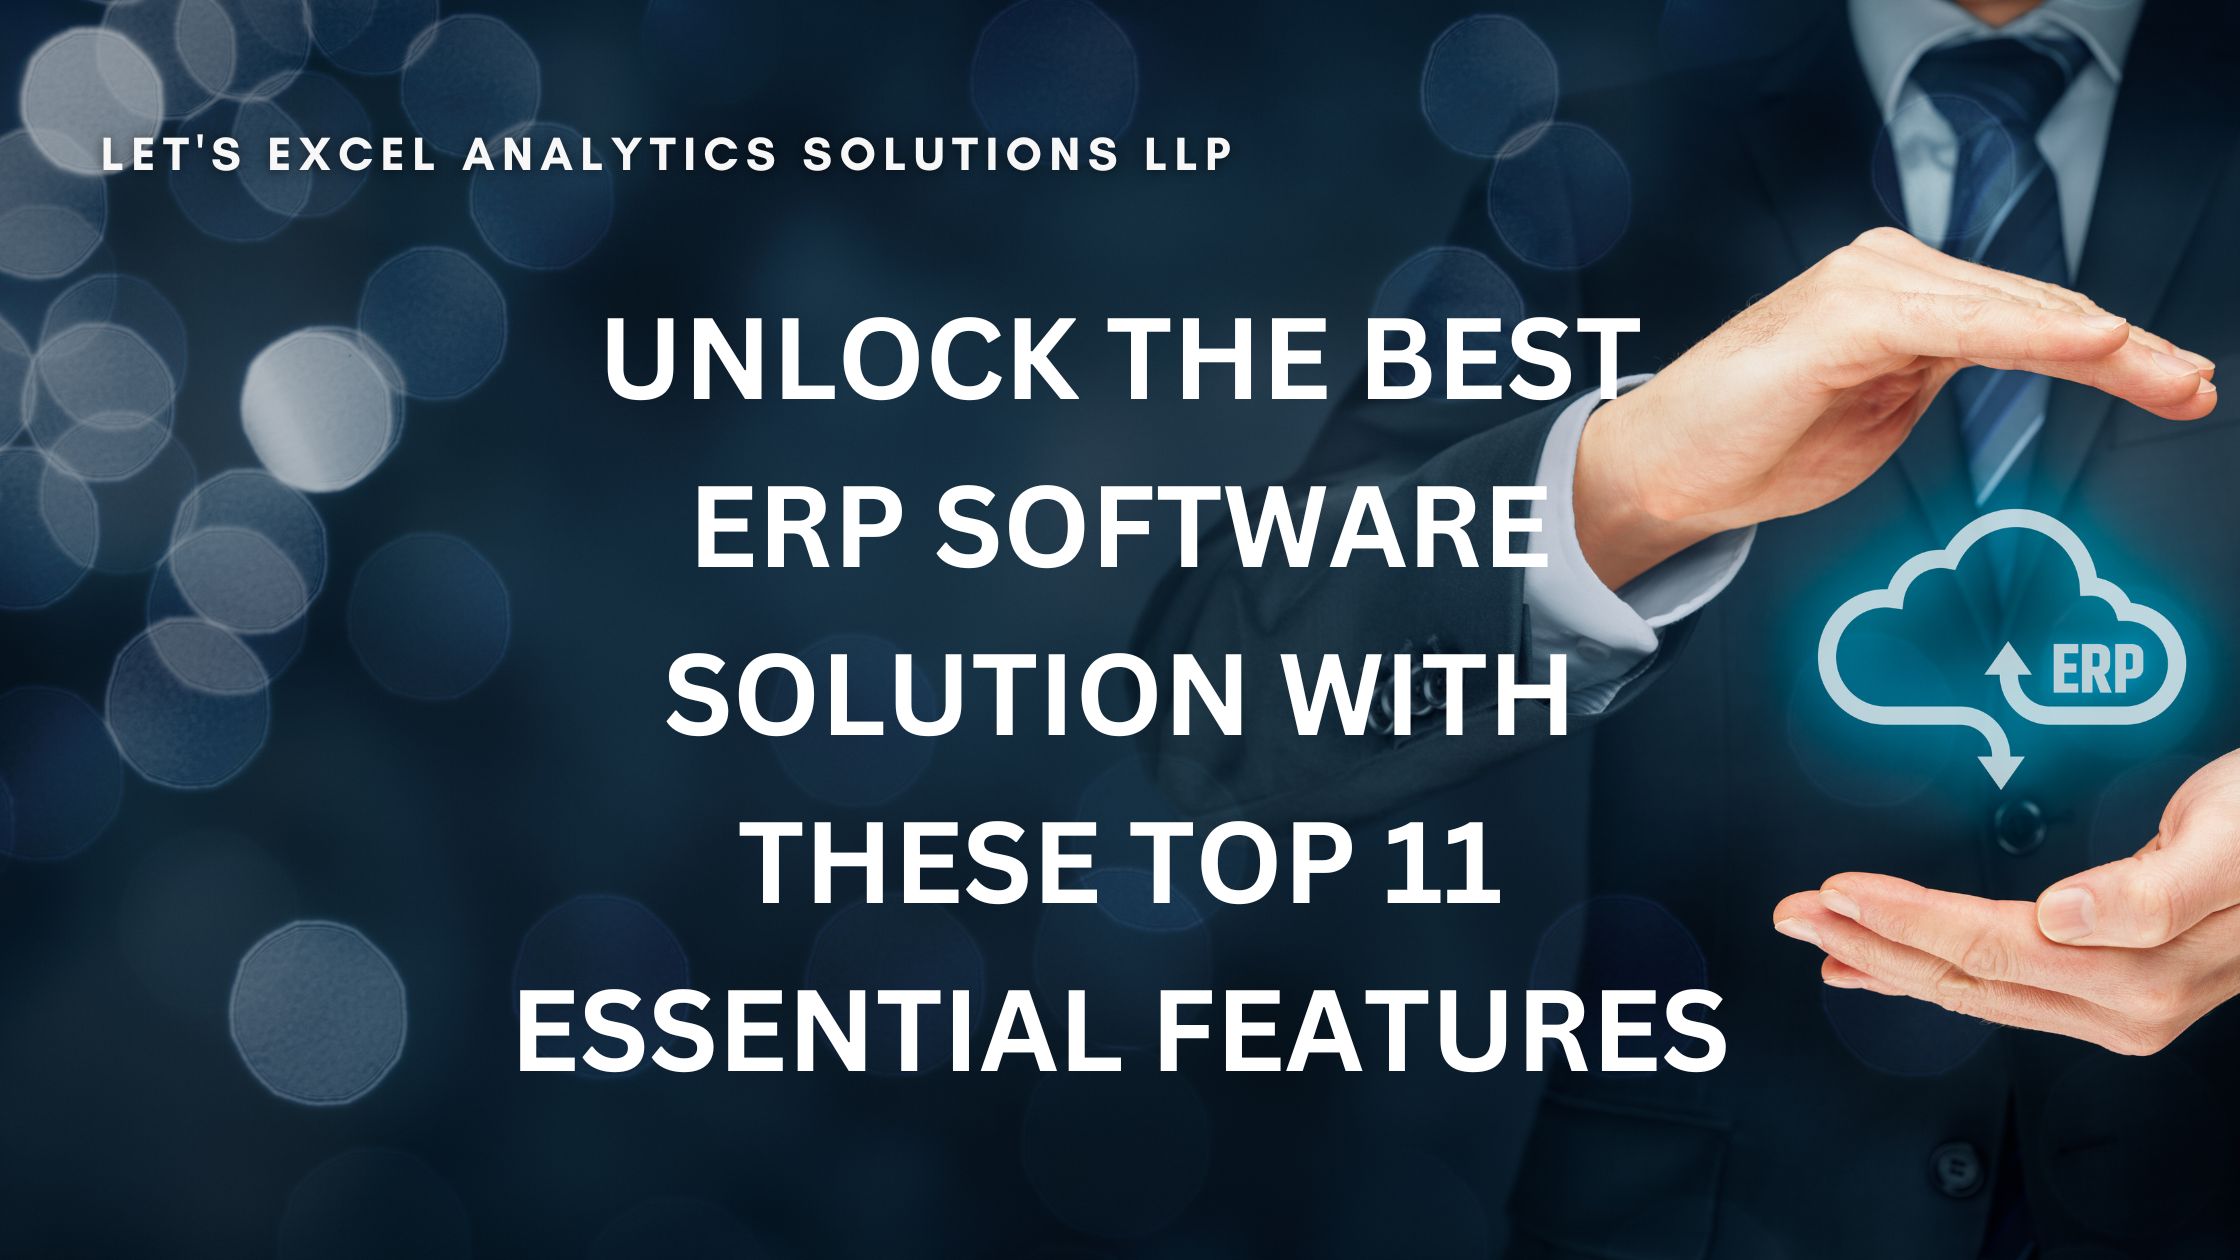 Unlock the Best ERP Software Solution with these Top 11 Essential Features